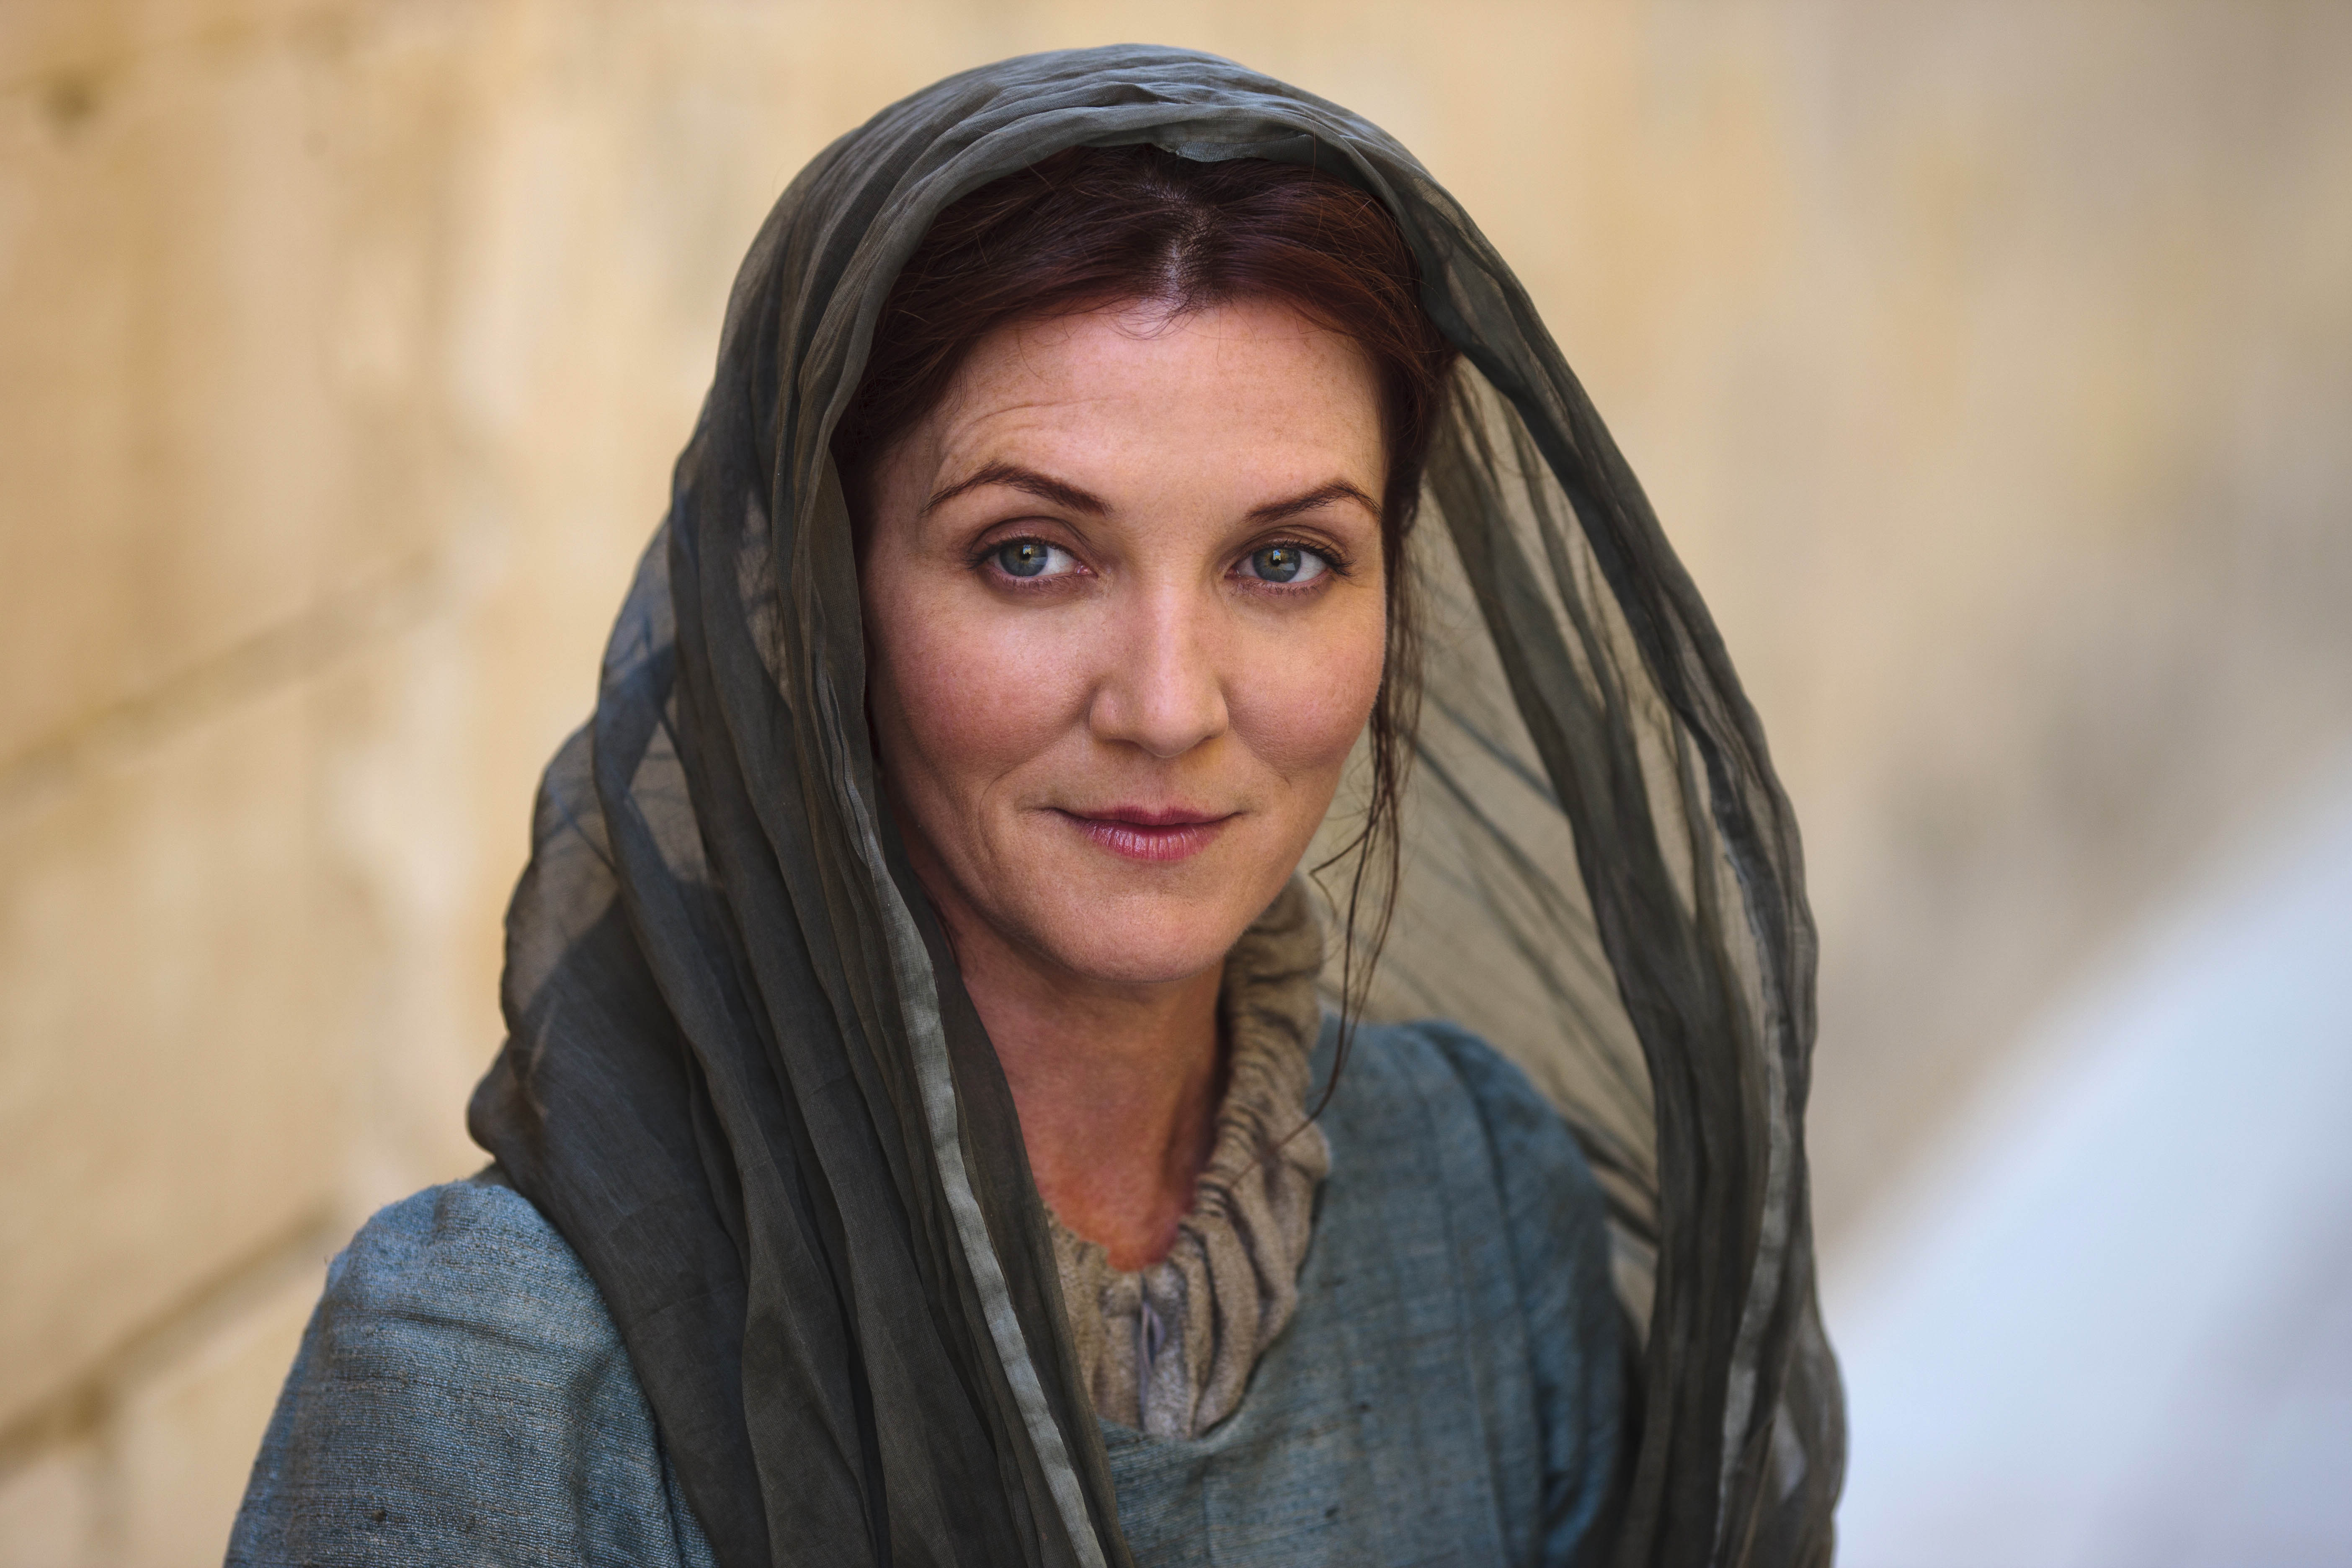 tv show, game of thrones, catelyn stark, michelle fairley